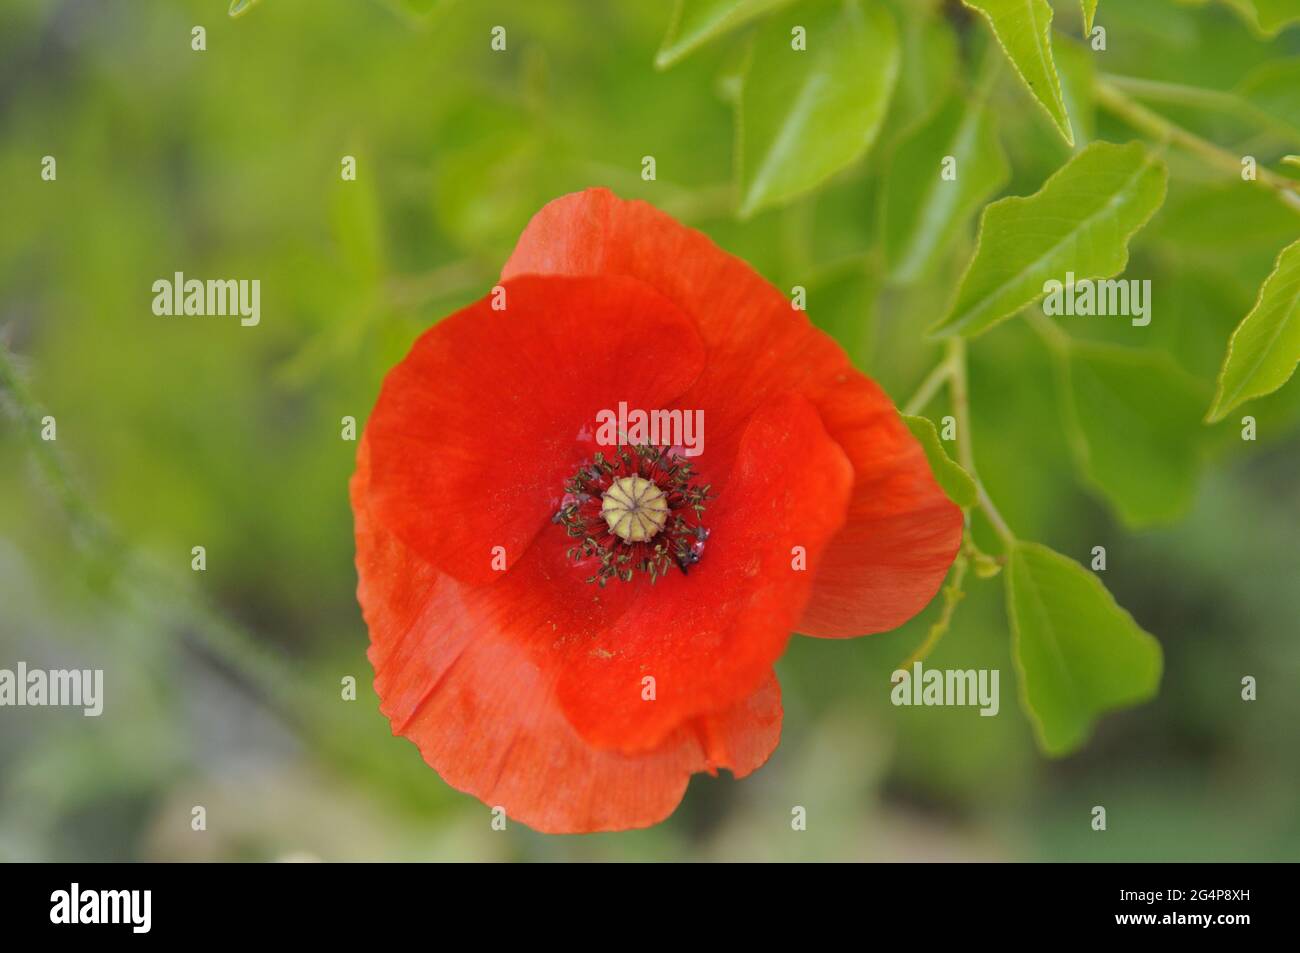 Top view of a red Common poppy flower in the garden Stock Photo